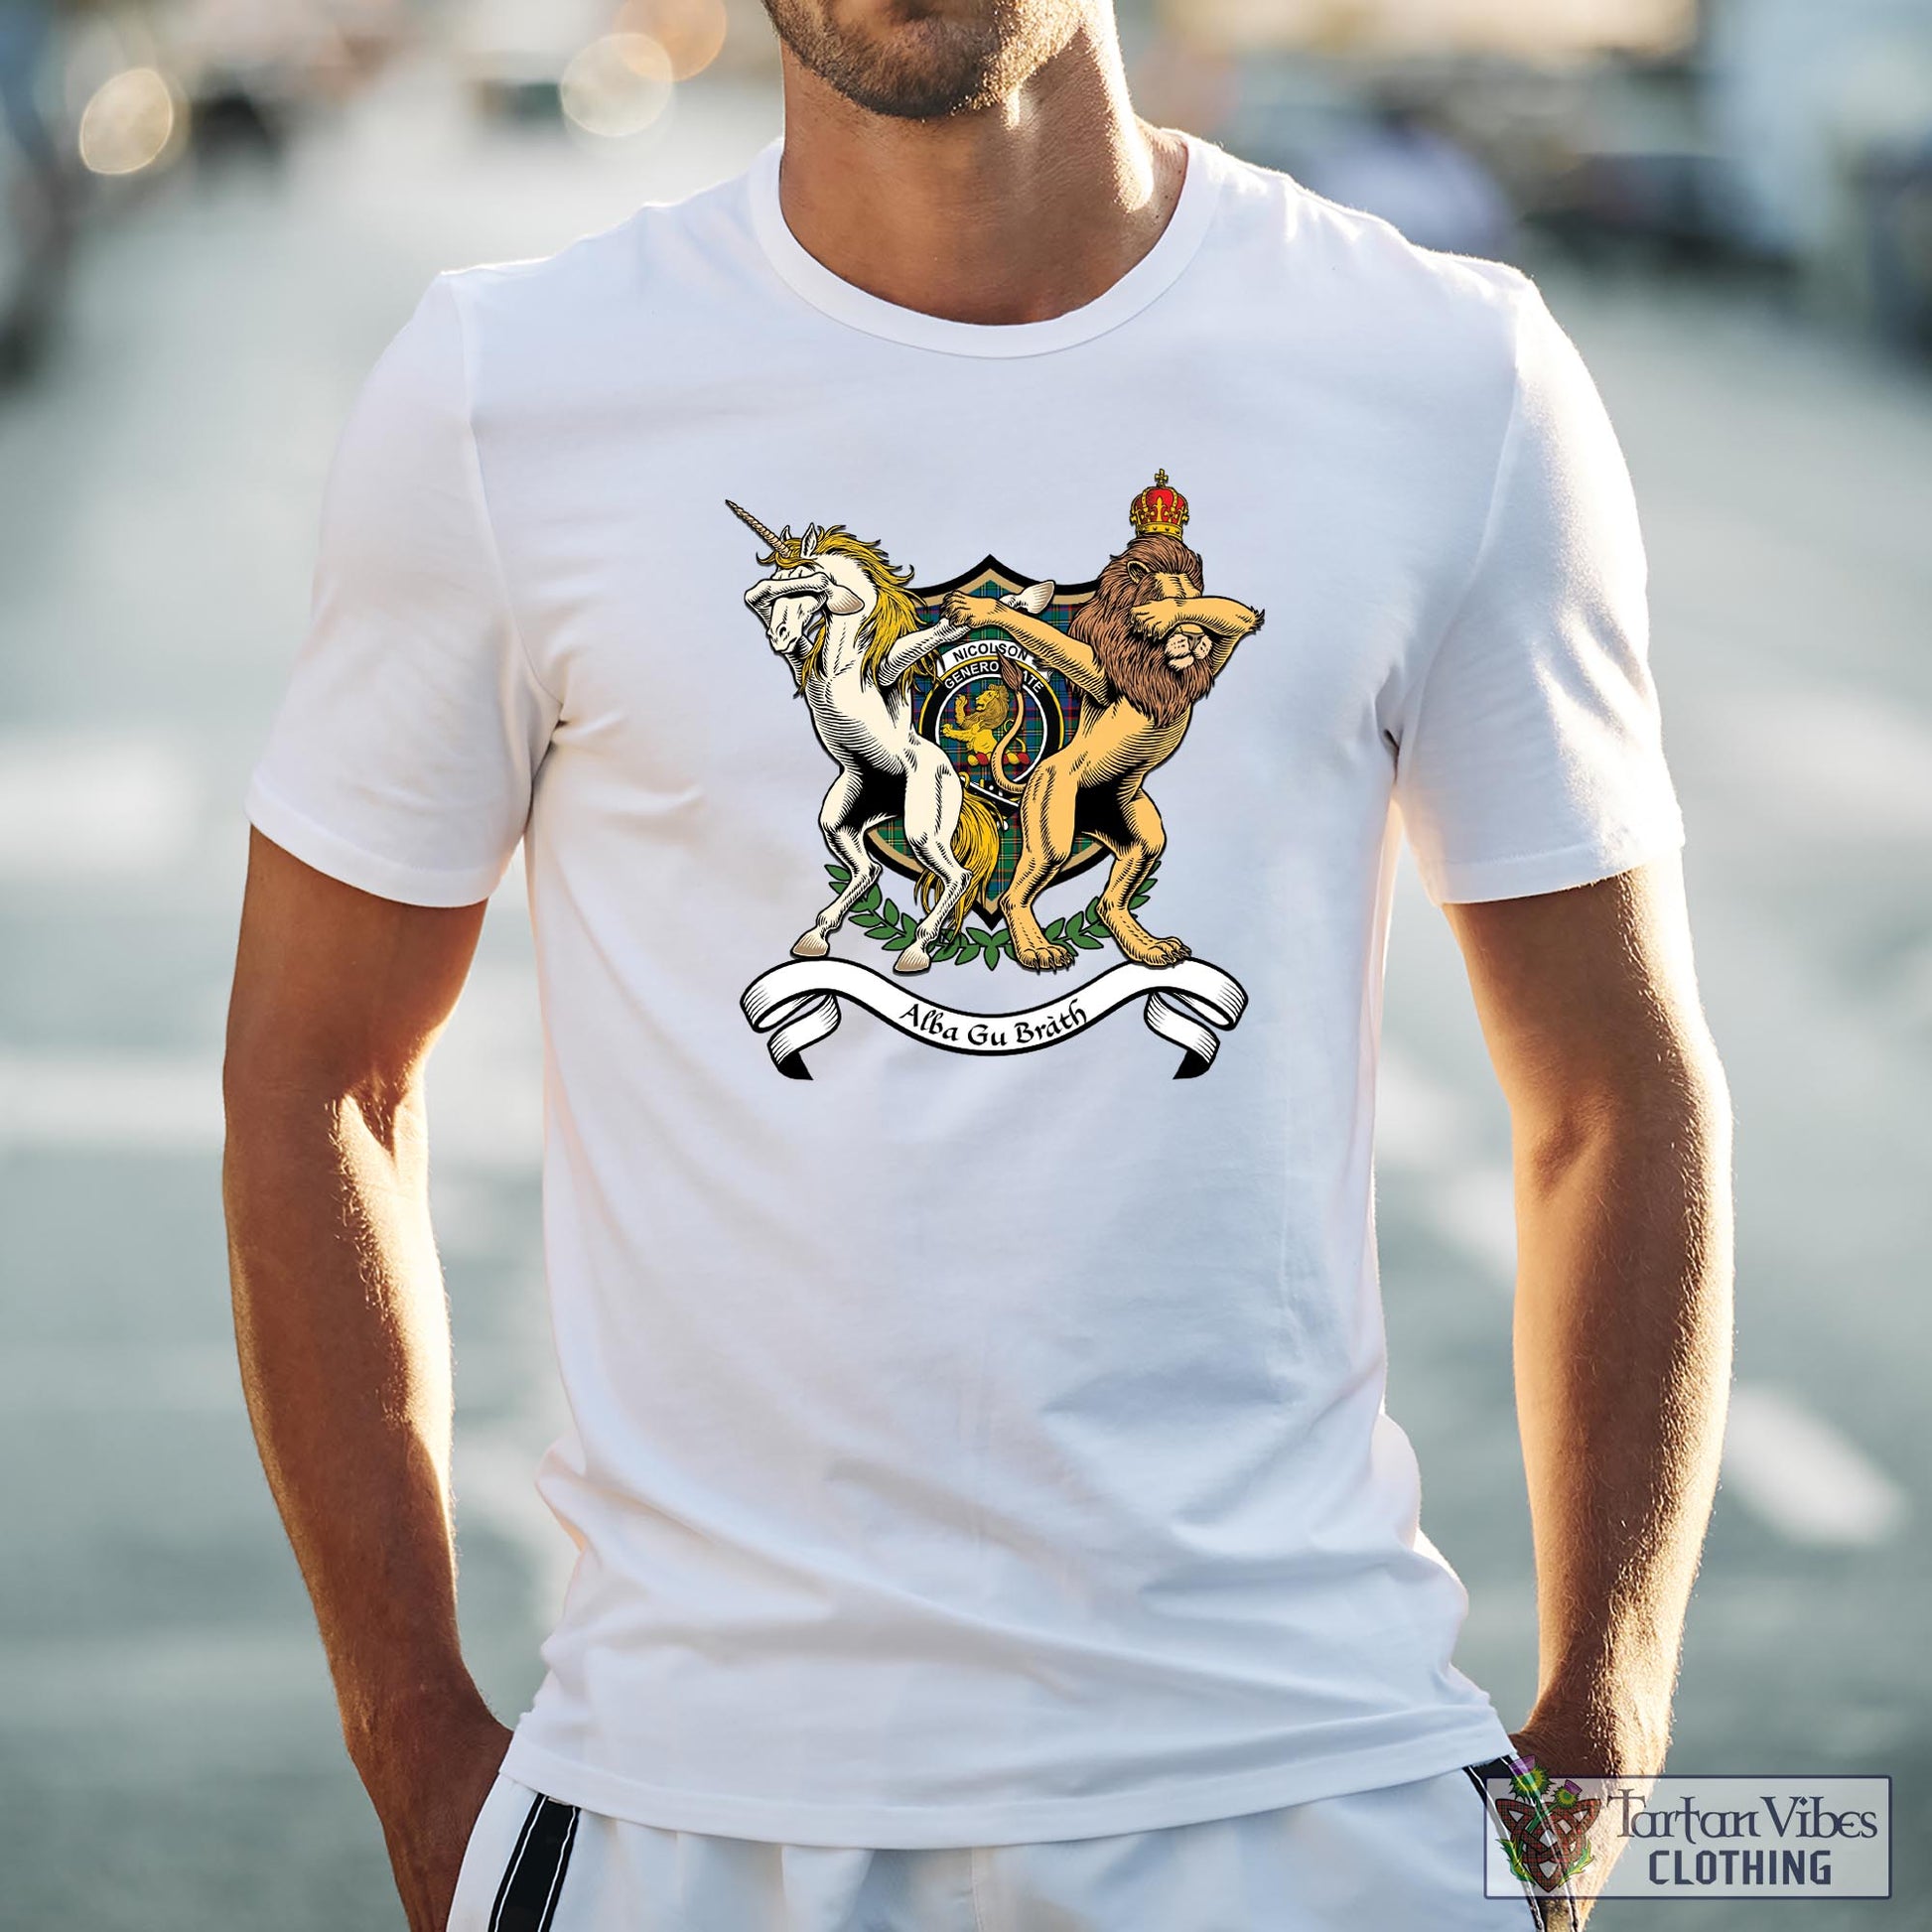 Tartan Vibes Clothing Nicolson Hunting Ancient Family Crest Cotton Men's T-Shirt with Scotland Royal Coat Of Arm Funny Style